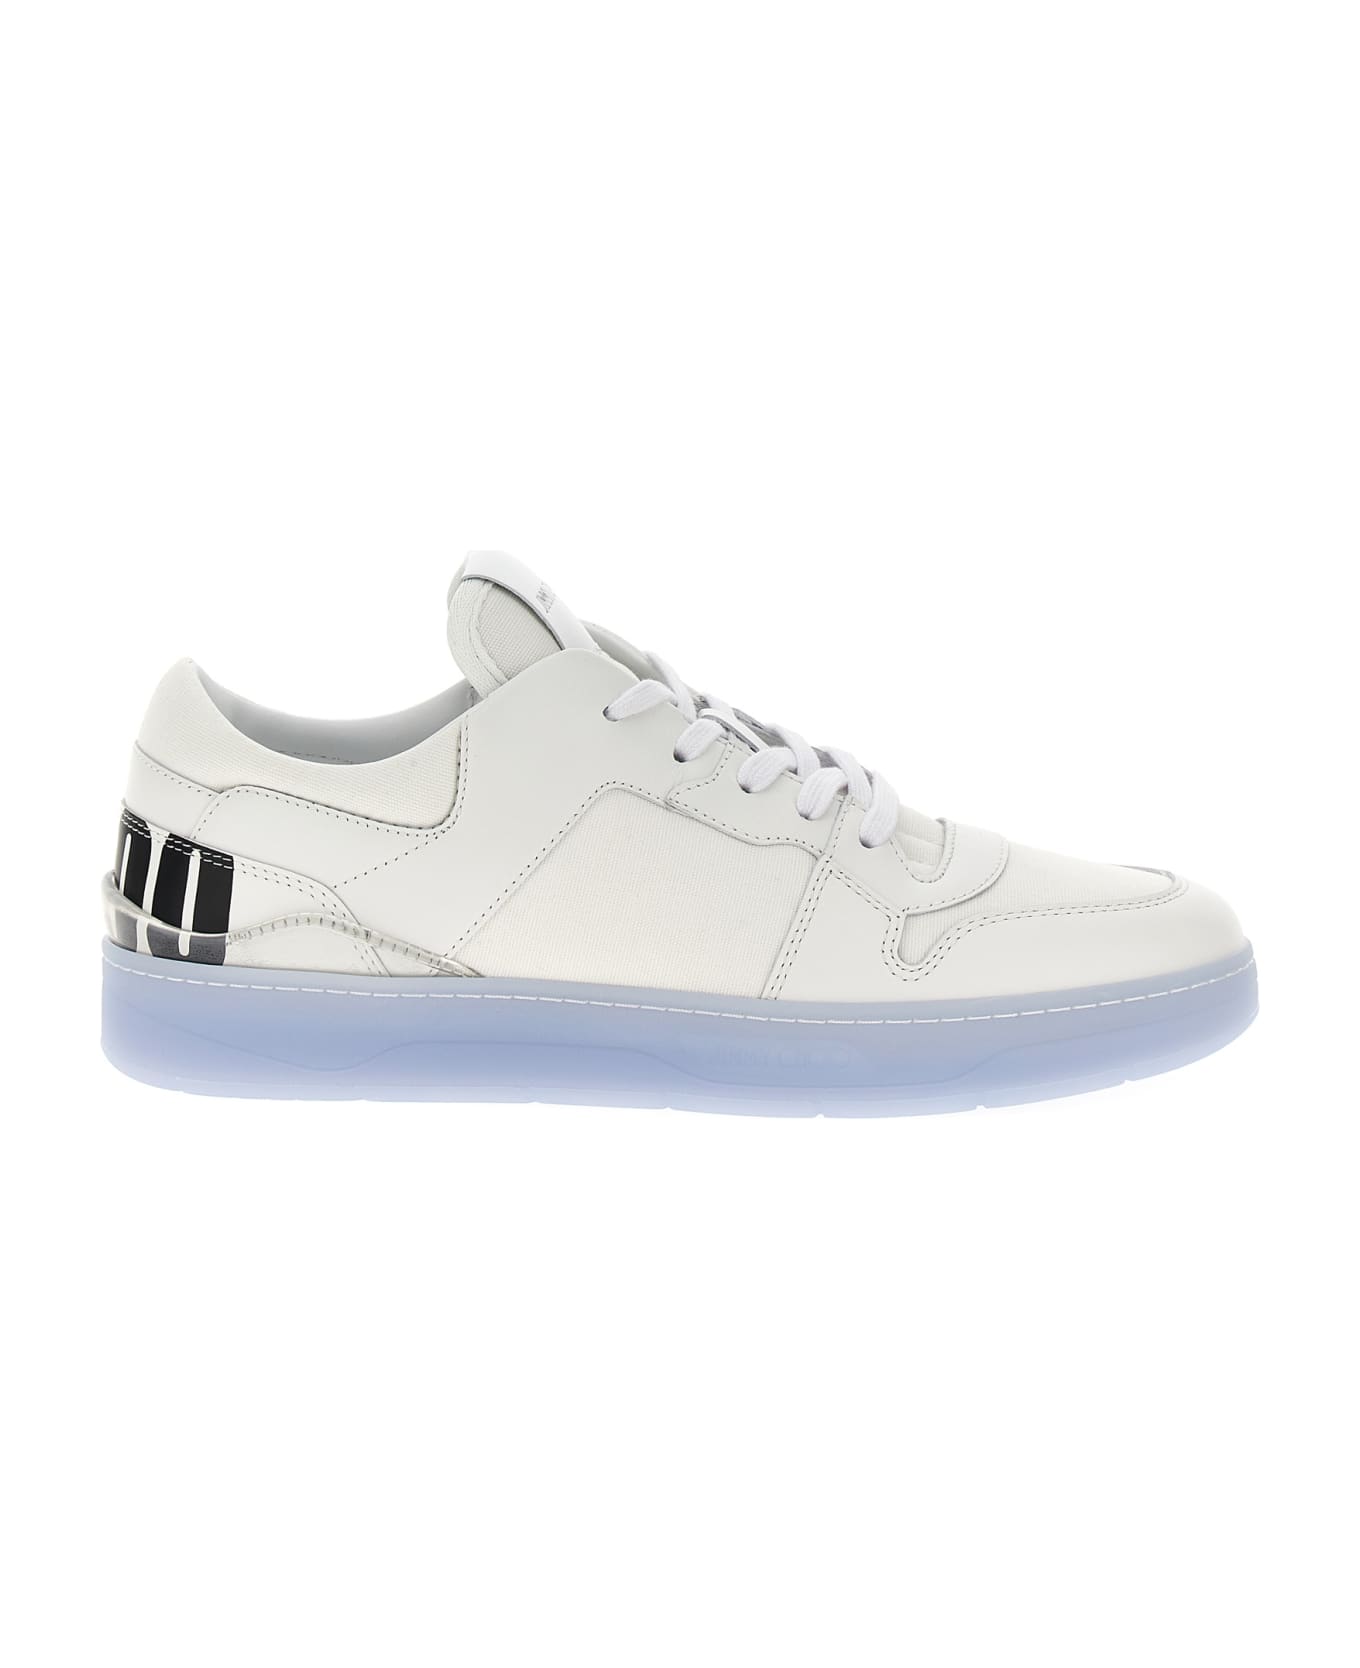 Jimmy Choo 'florence' Sneakers - White